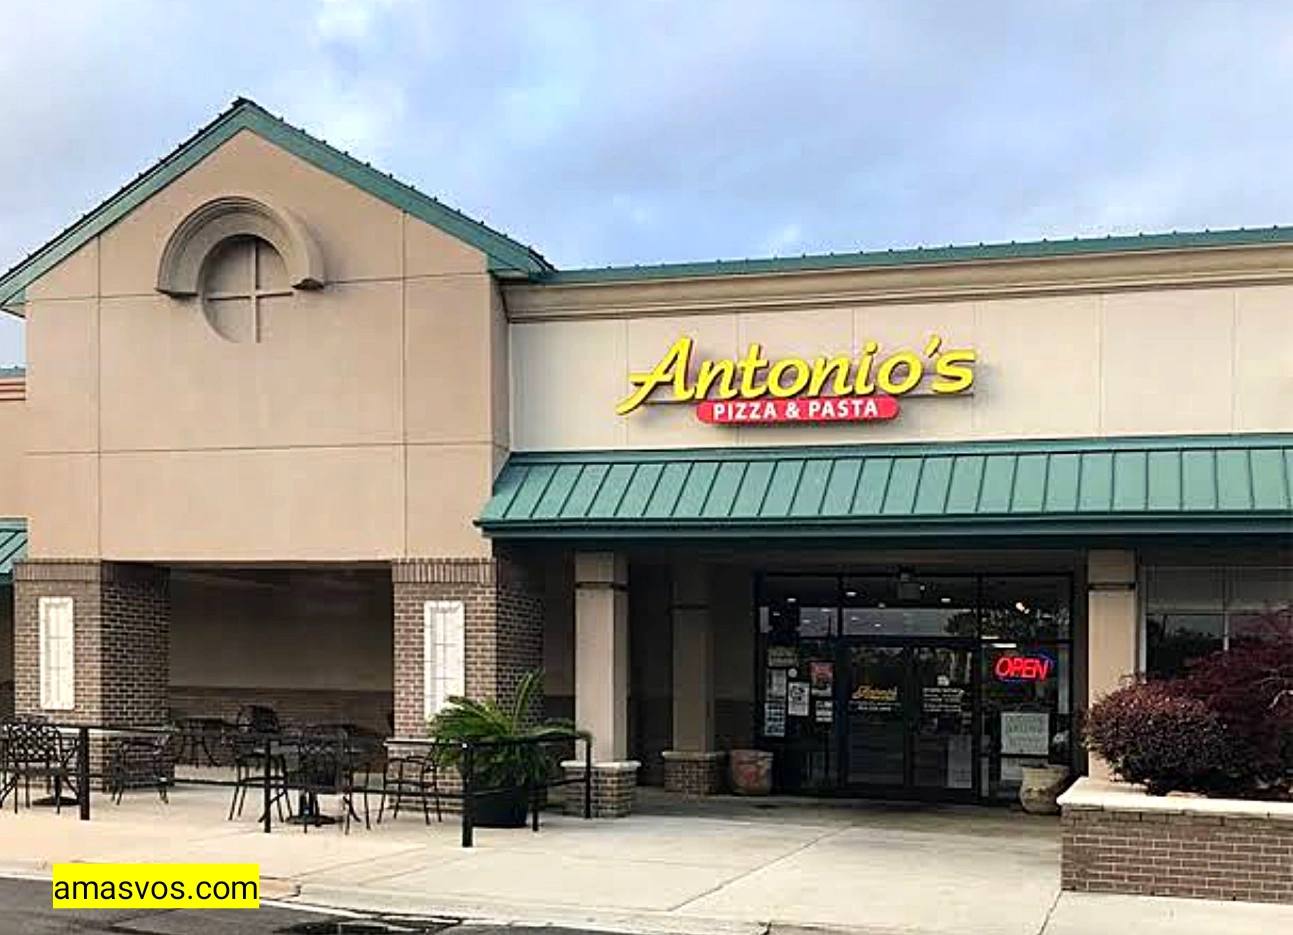 Antonio's Real New York Pizza Best Places To Eat In Estes Park